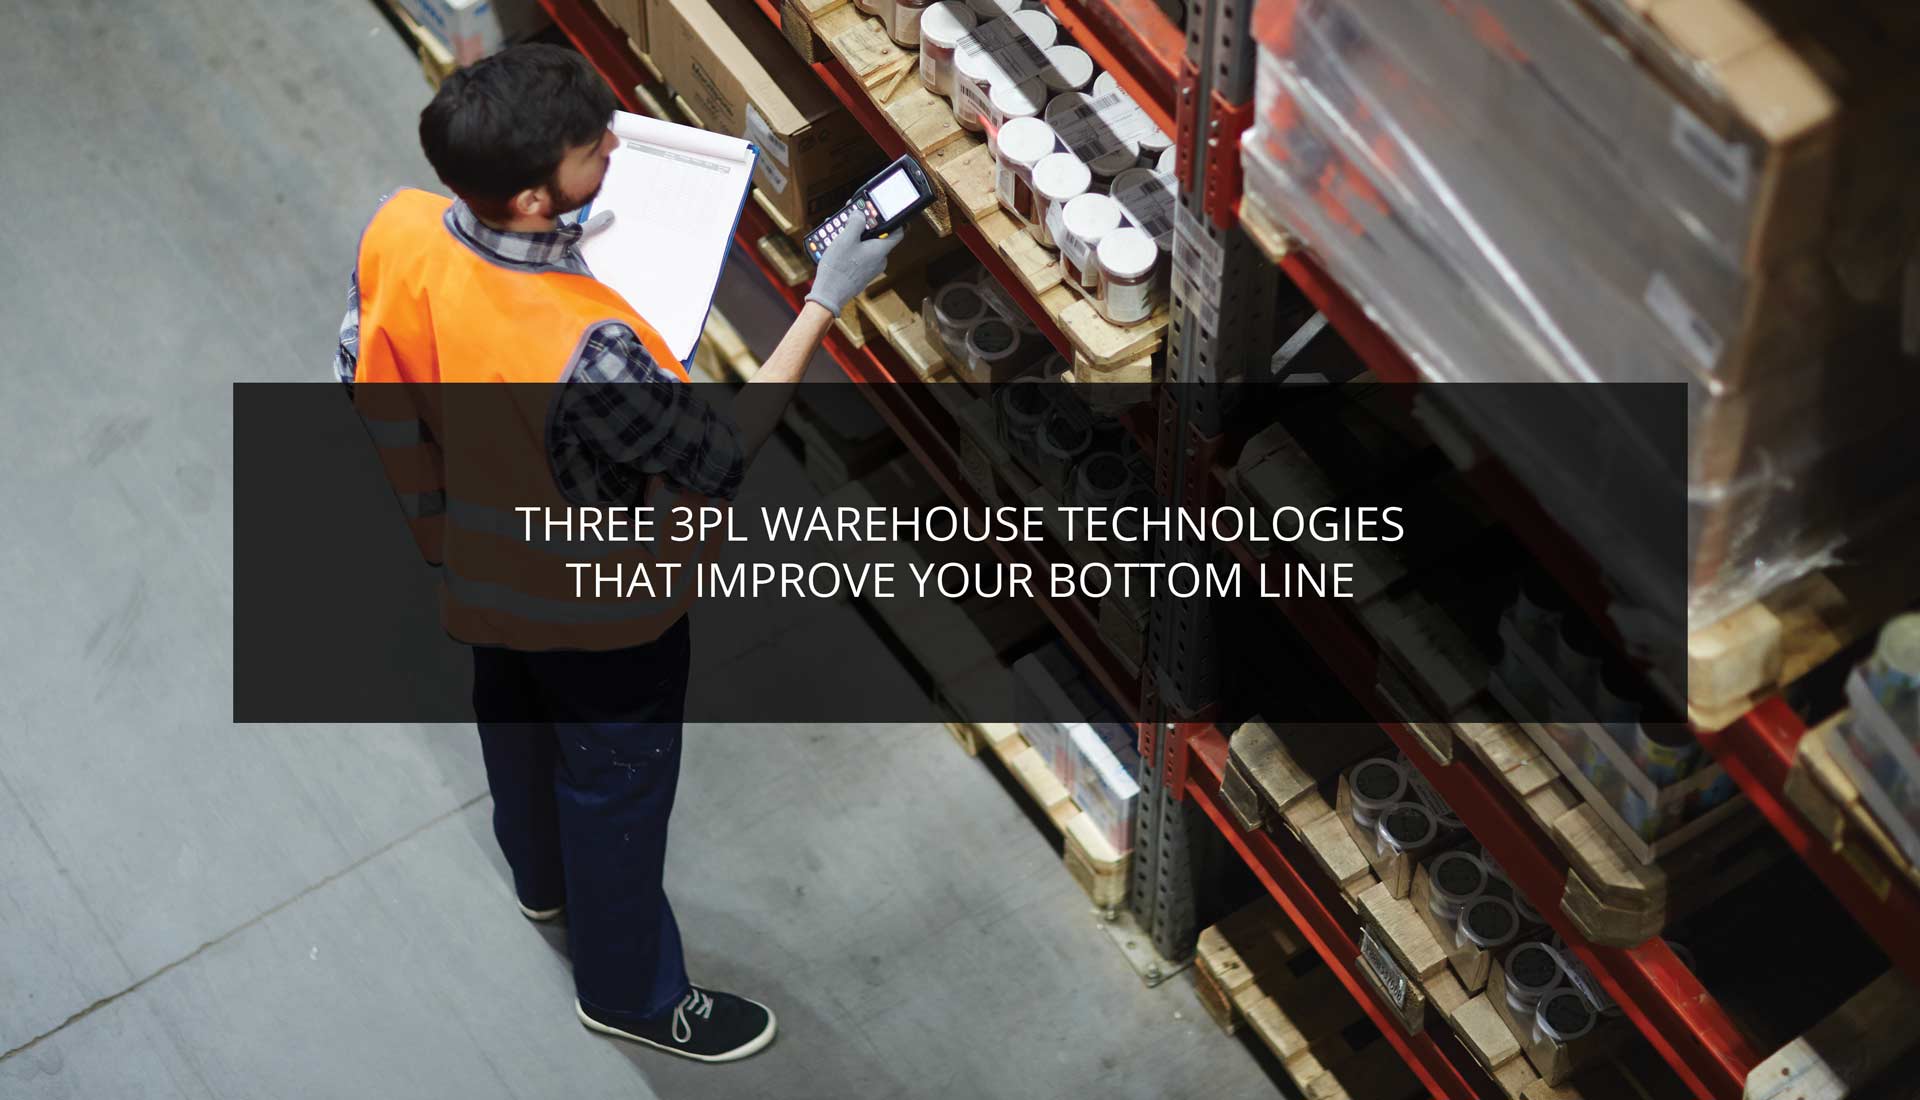 Three 3PL Warehouse Technologies That Improve Your Bottom Line